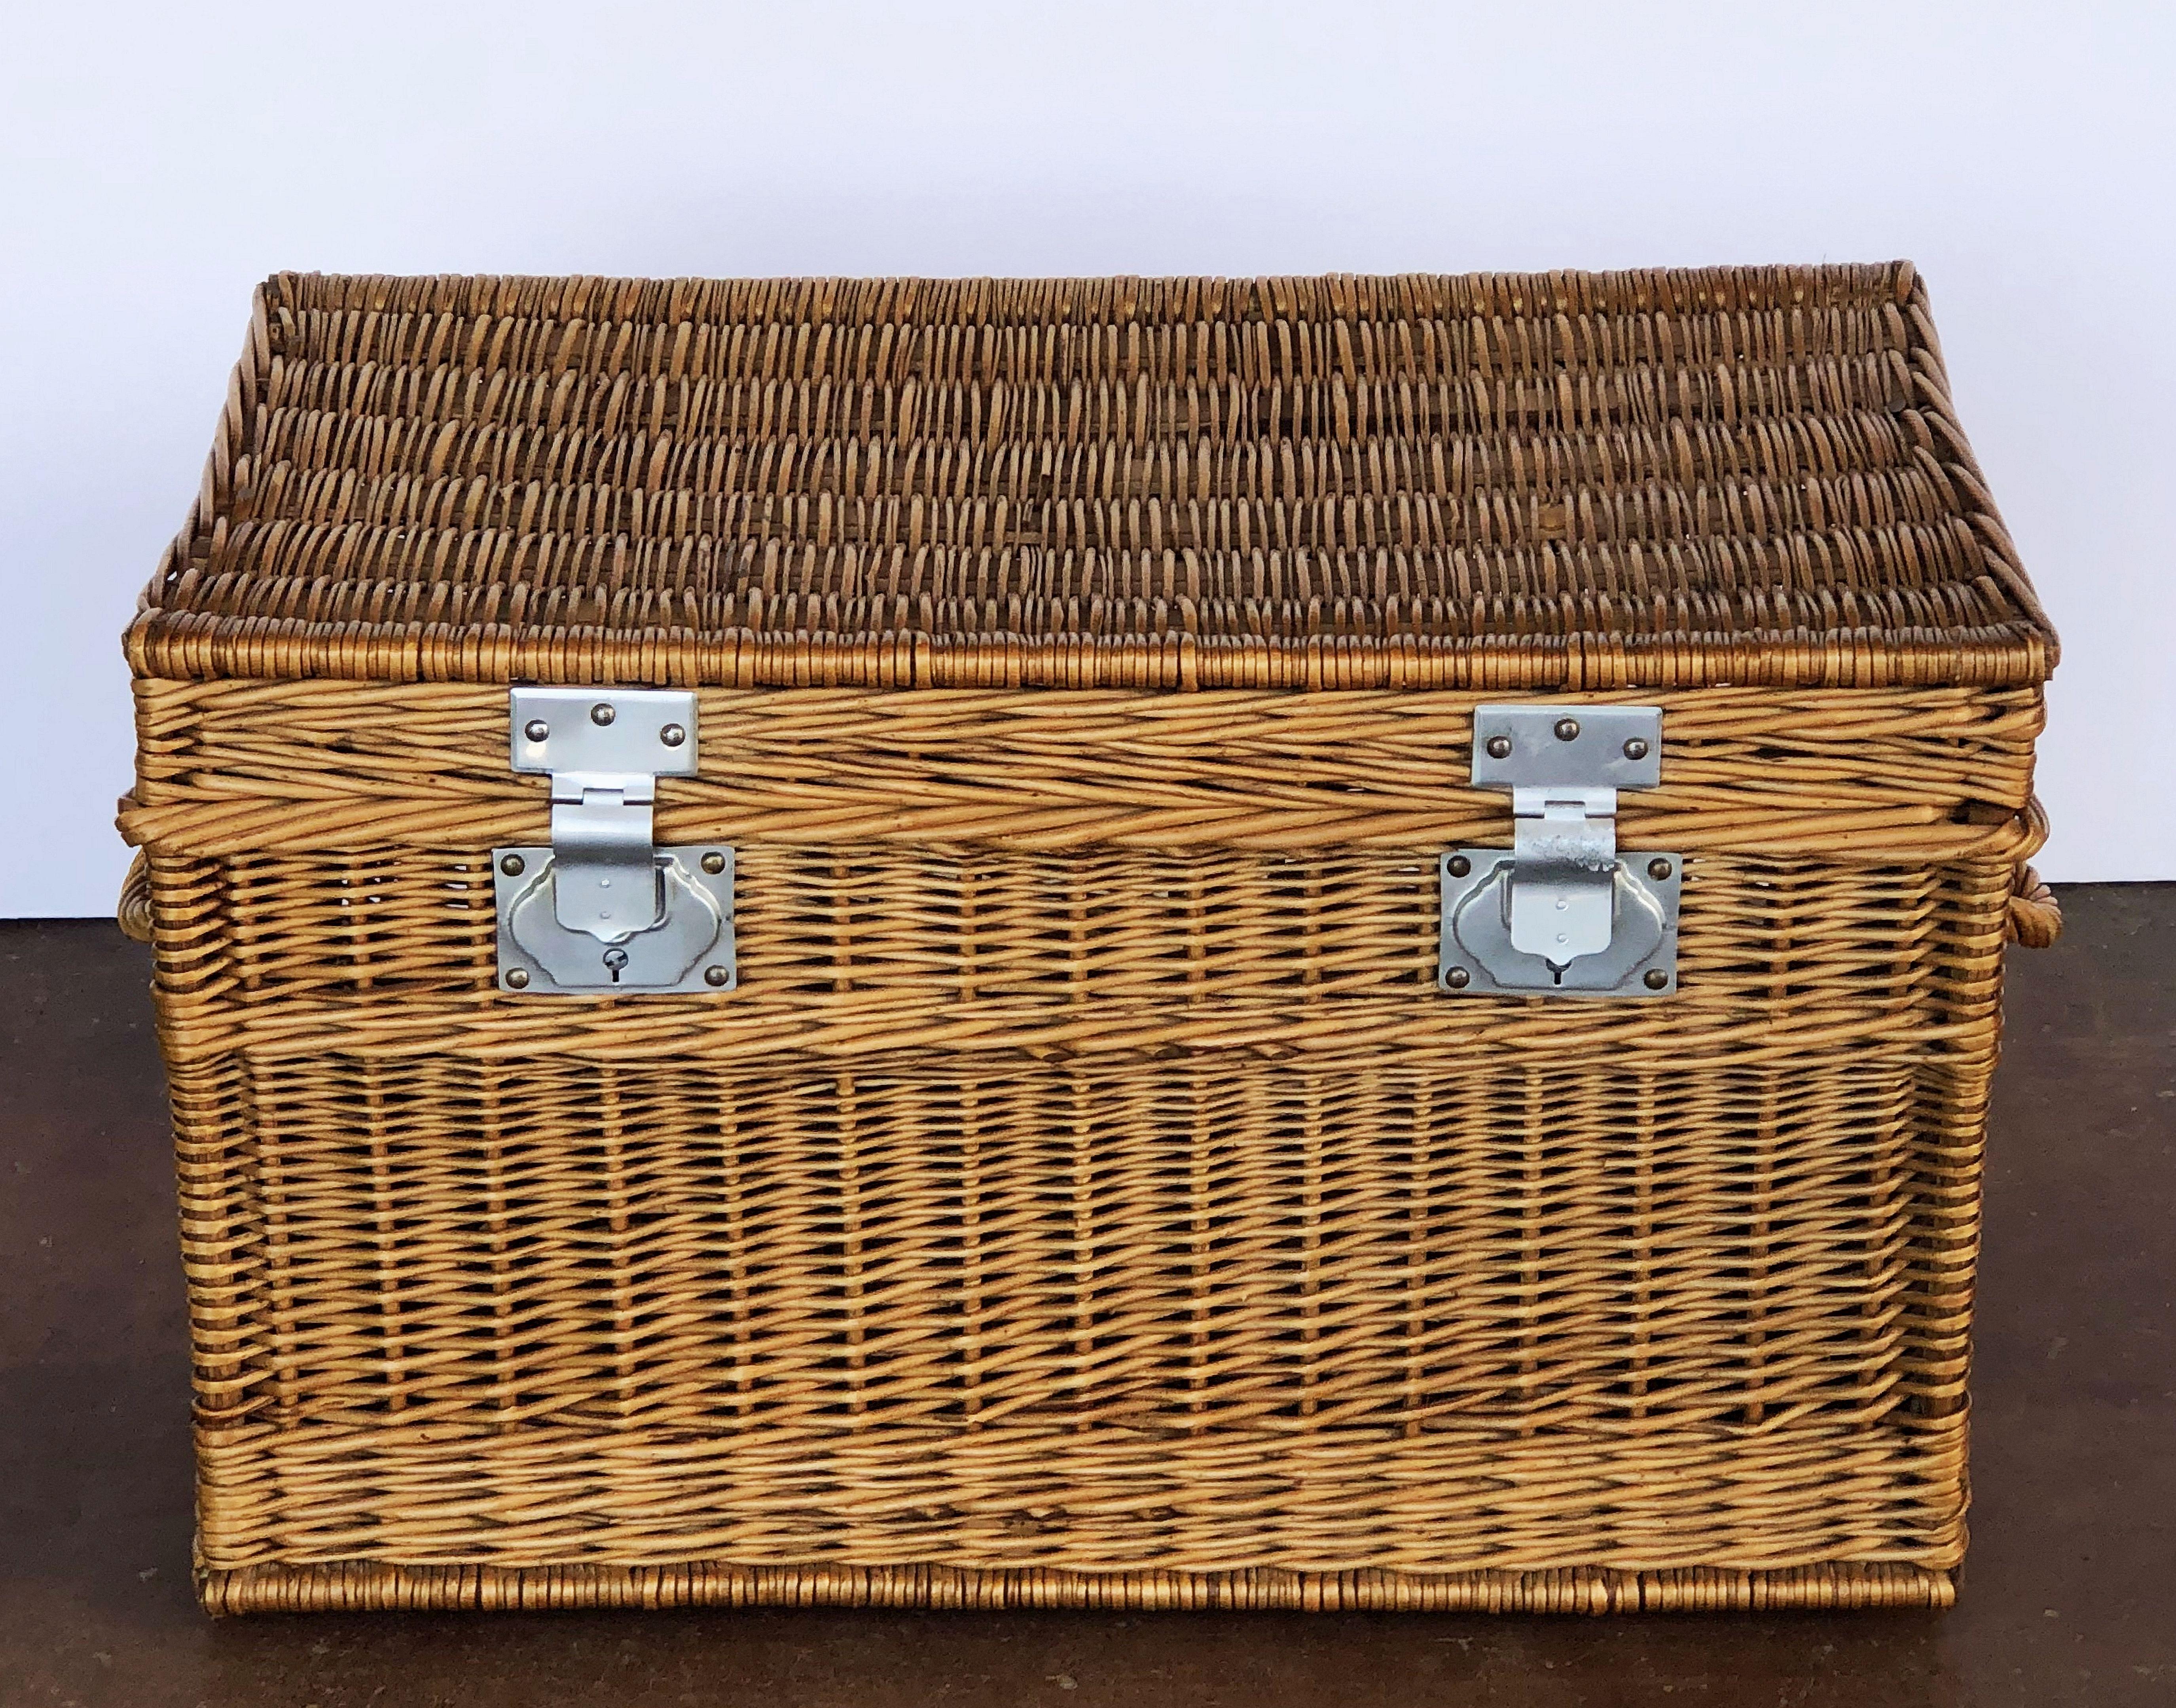 A large French basket hamper of woven willow with steel hardware and handles on each side. With wooden runners on underside.

Several available in this style, slight variations of size.

Note: Latches do not always close and lock.